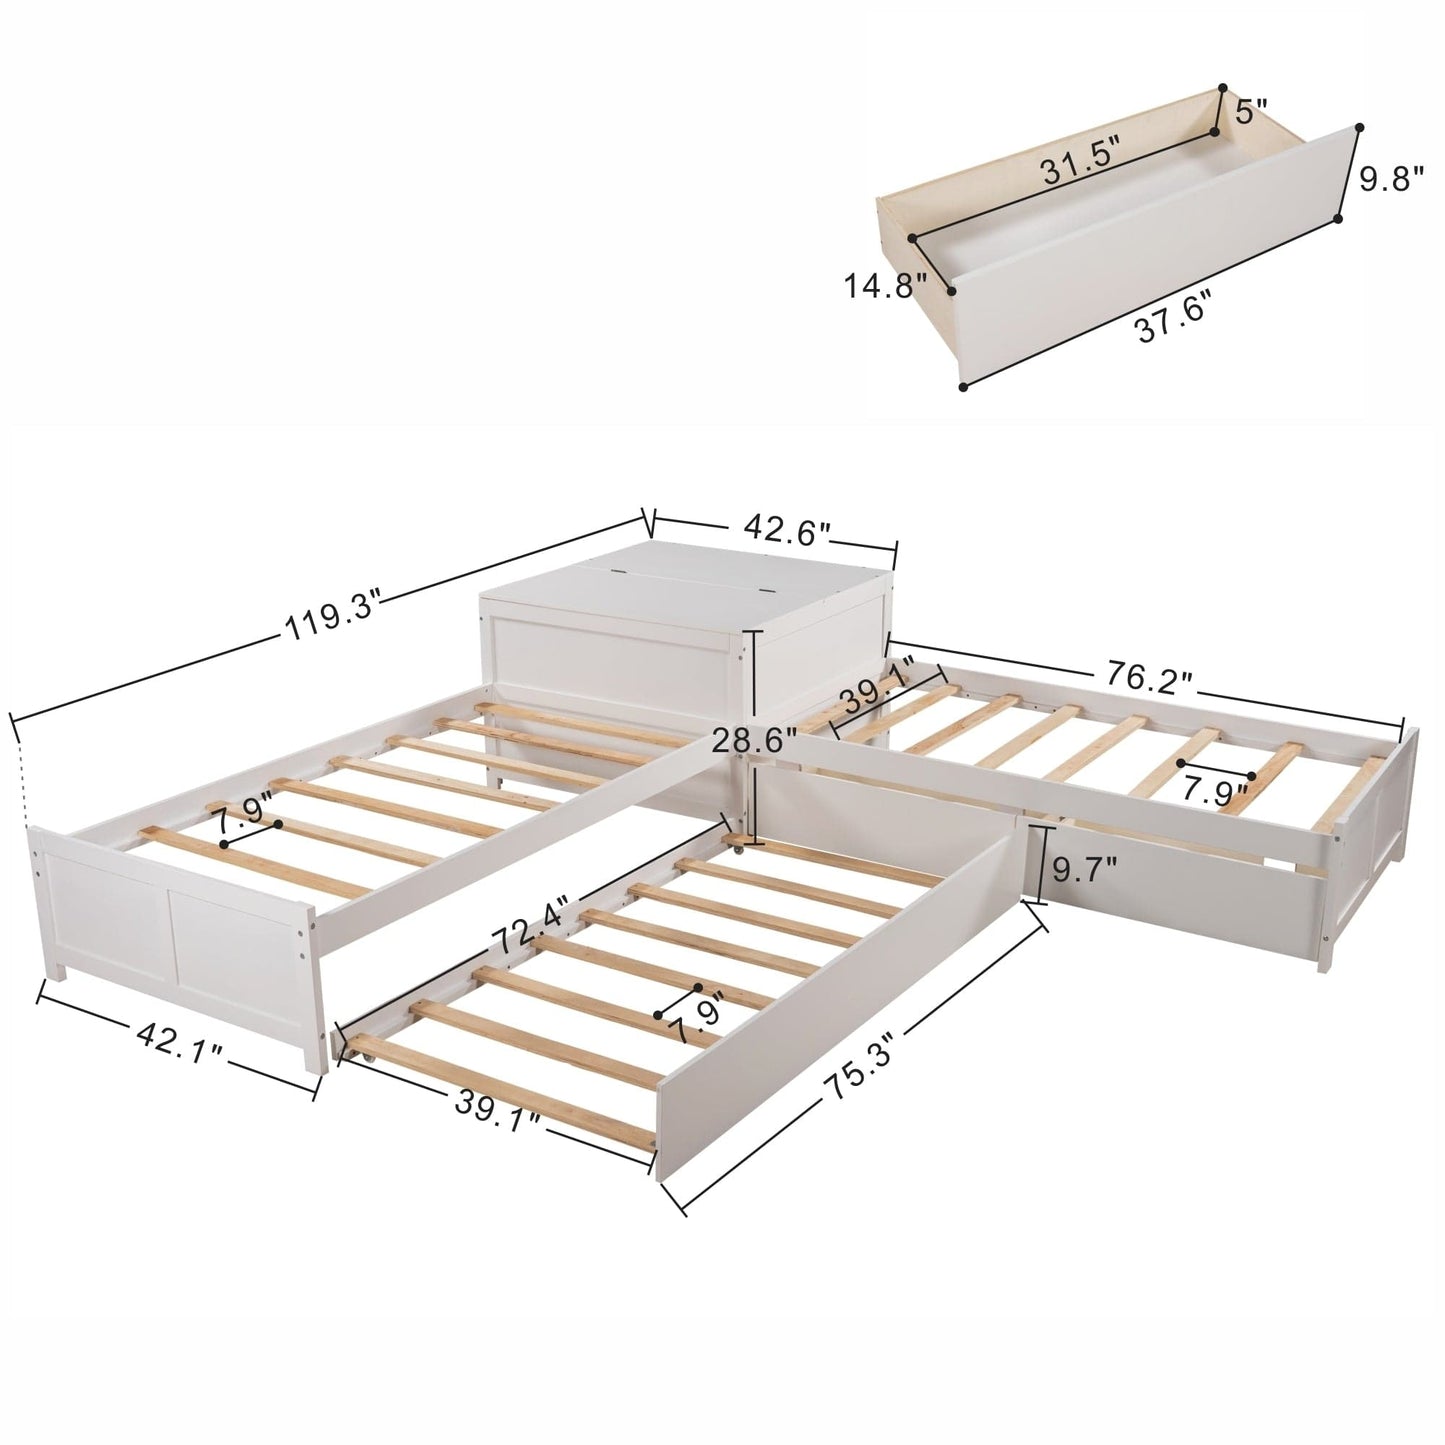 L-shaped Platform Bed with Trundle and Drawers Linked with built-in Flip Square Table,Twin,White